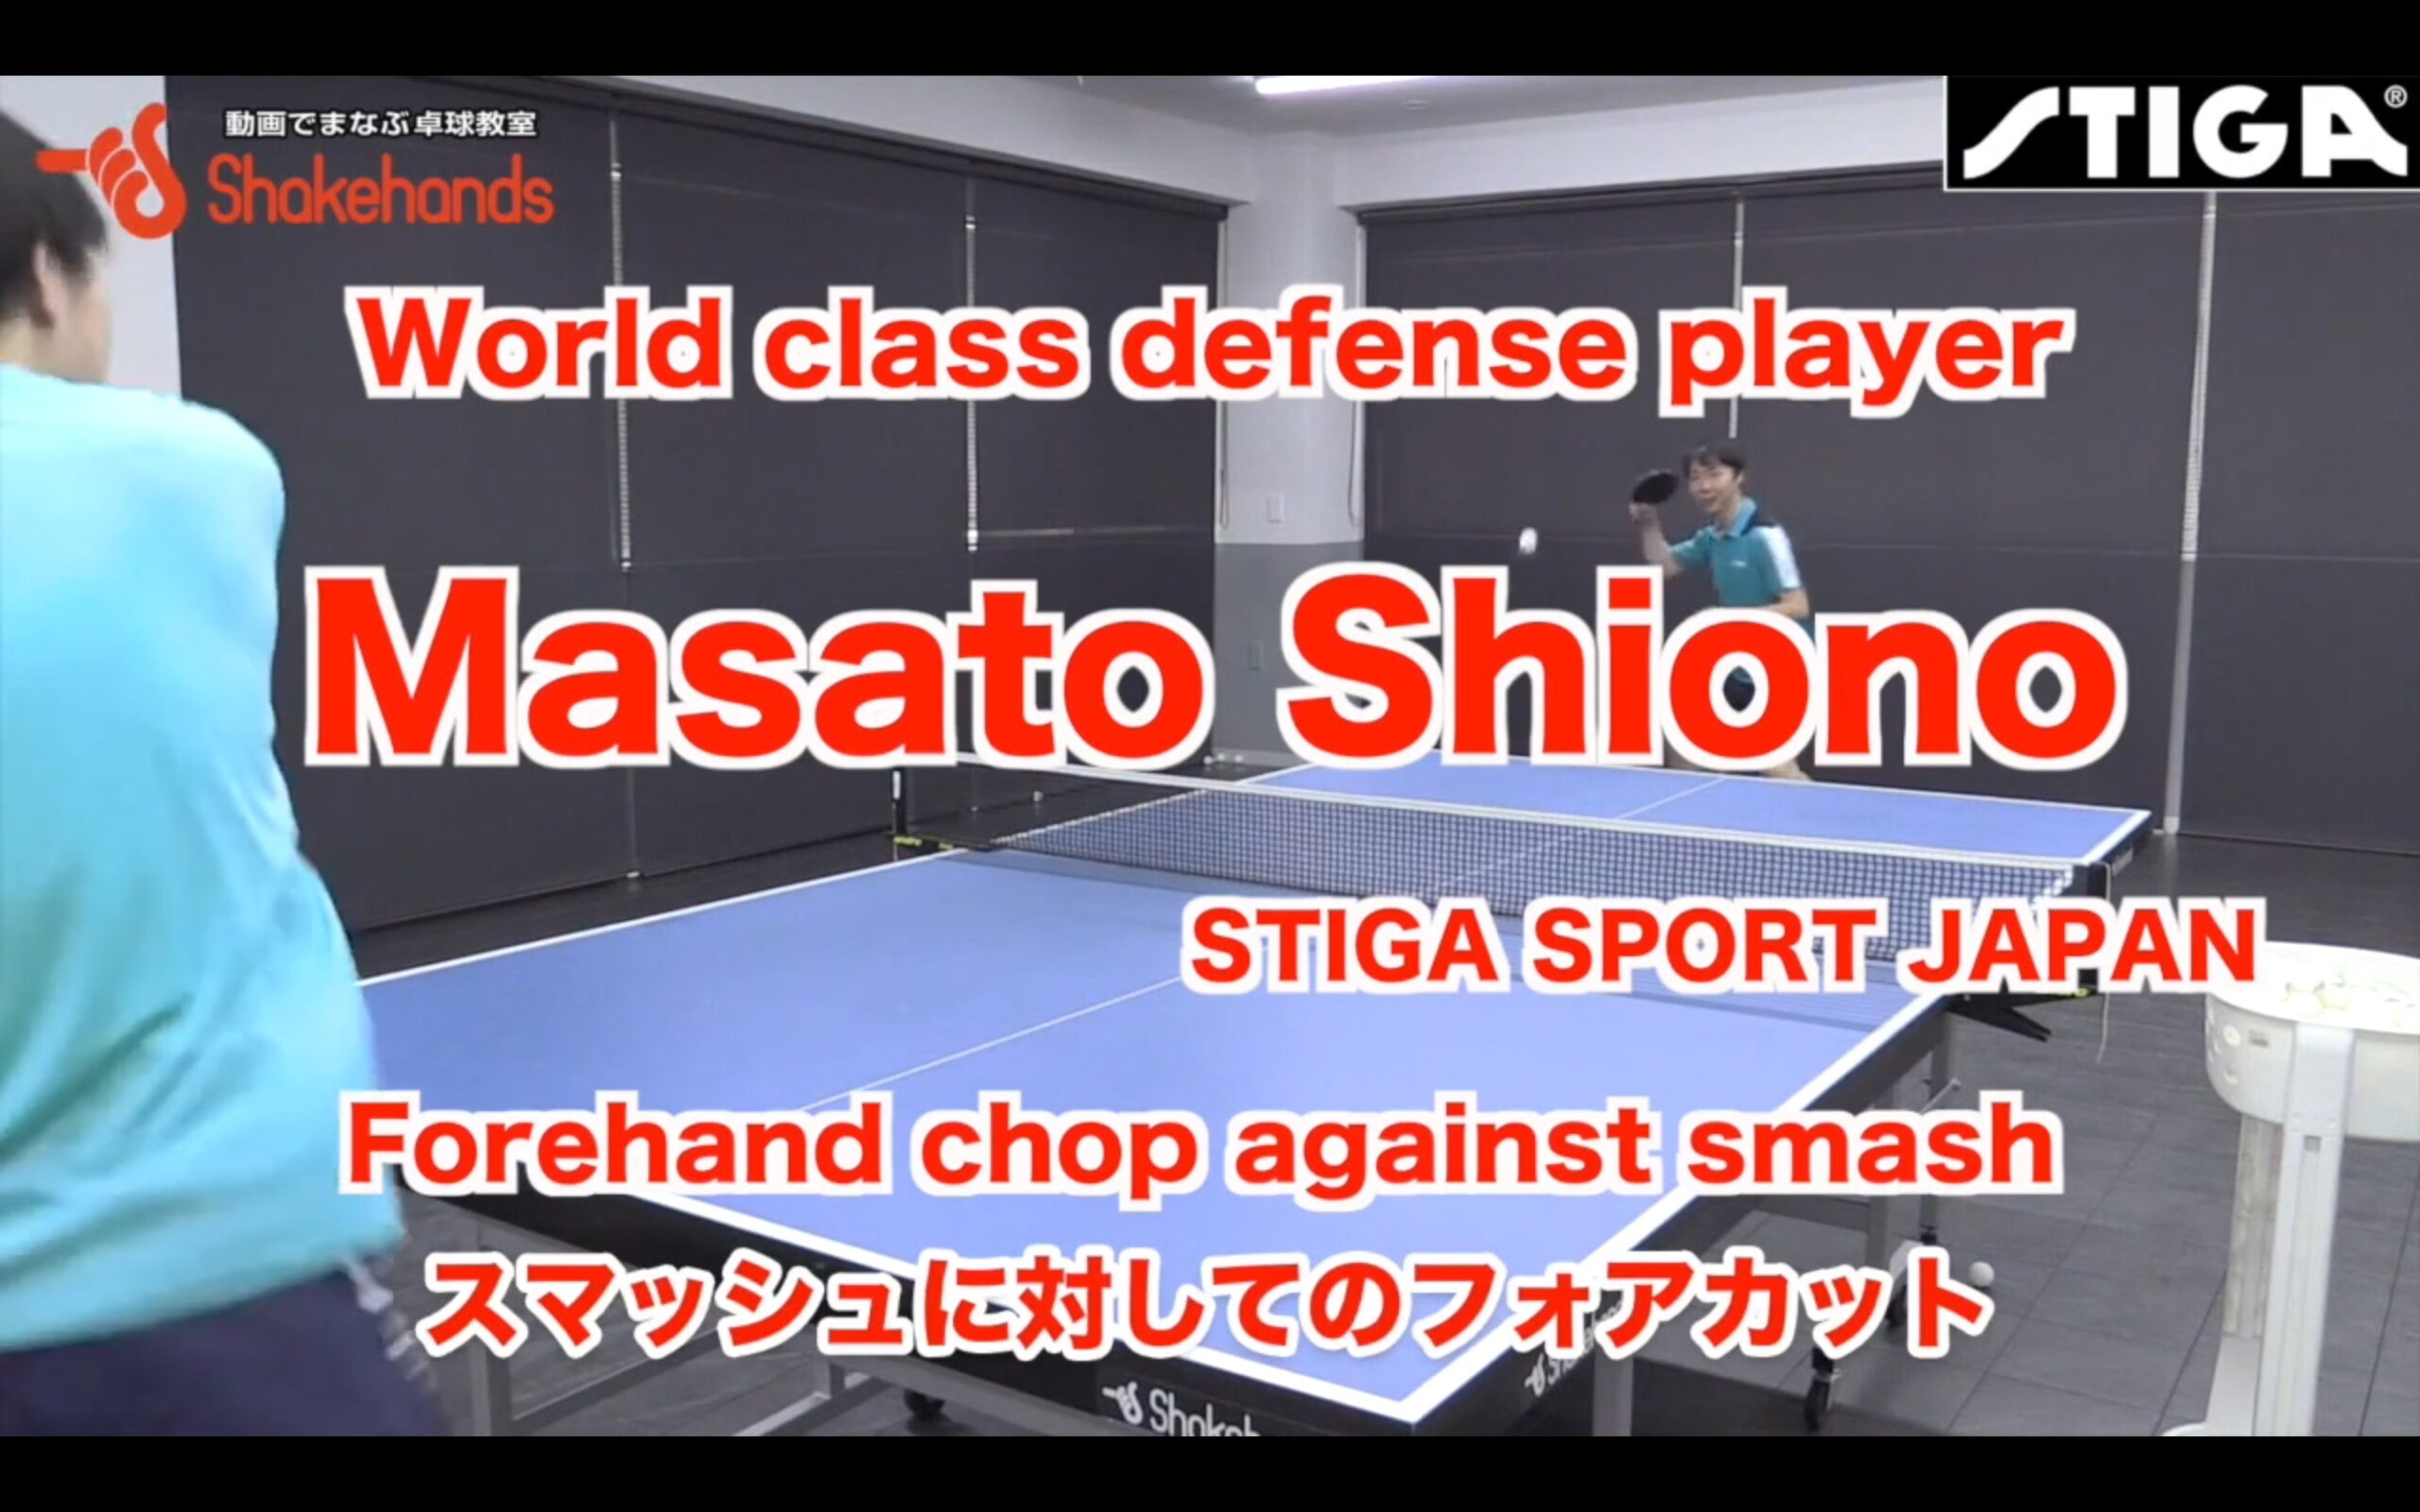 Forehand chop against smash